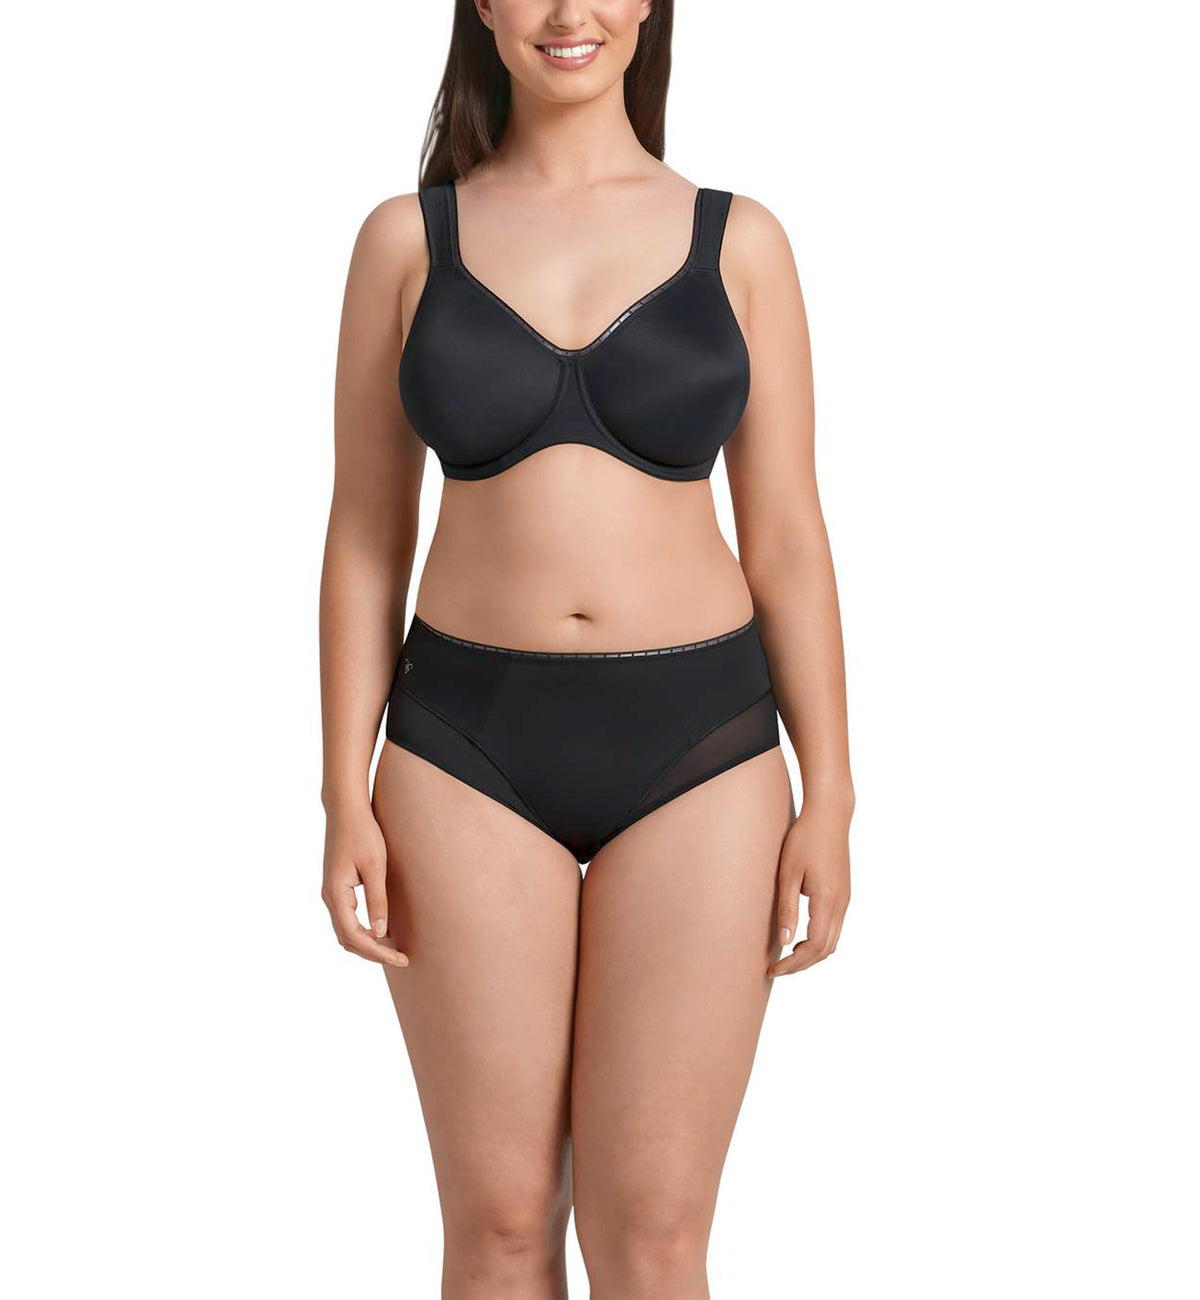 Rosa Faia by Anita Twin Firm Seamless Support Underwire Bra (5694),30D,Black - Black,30D